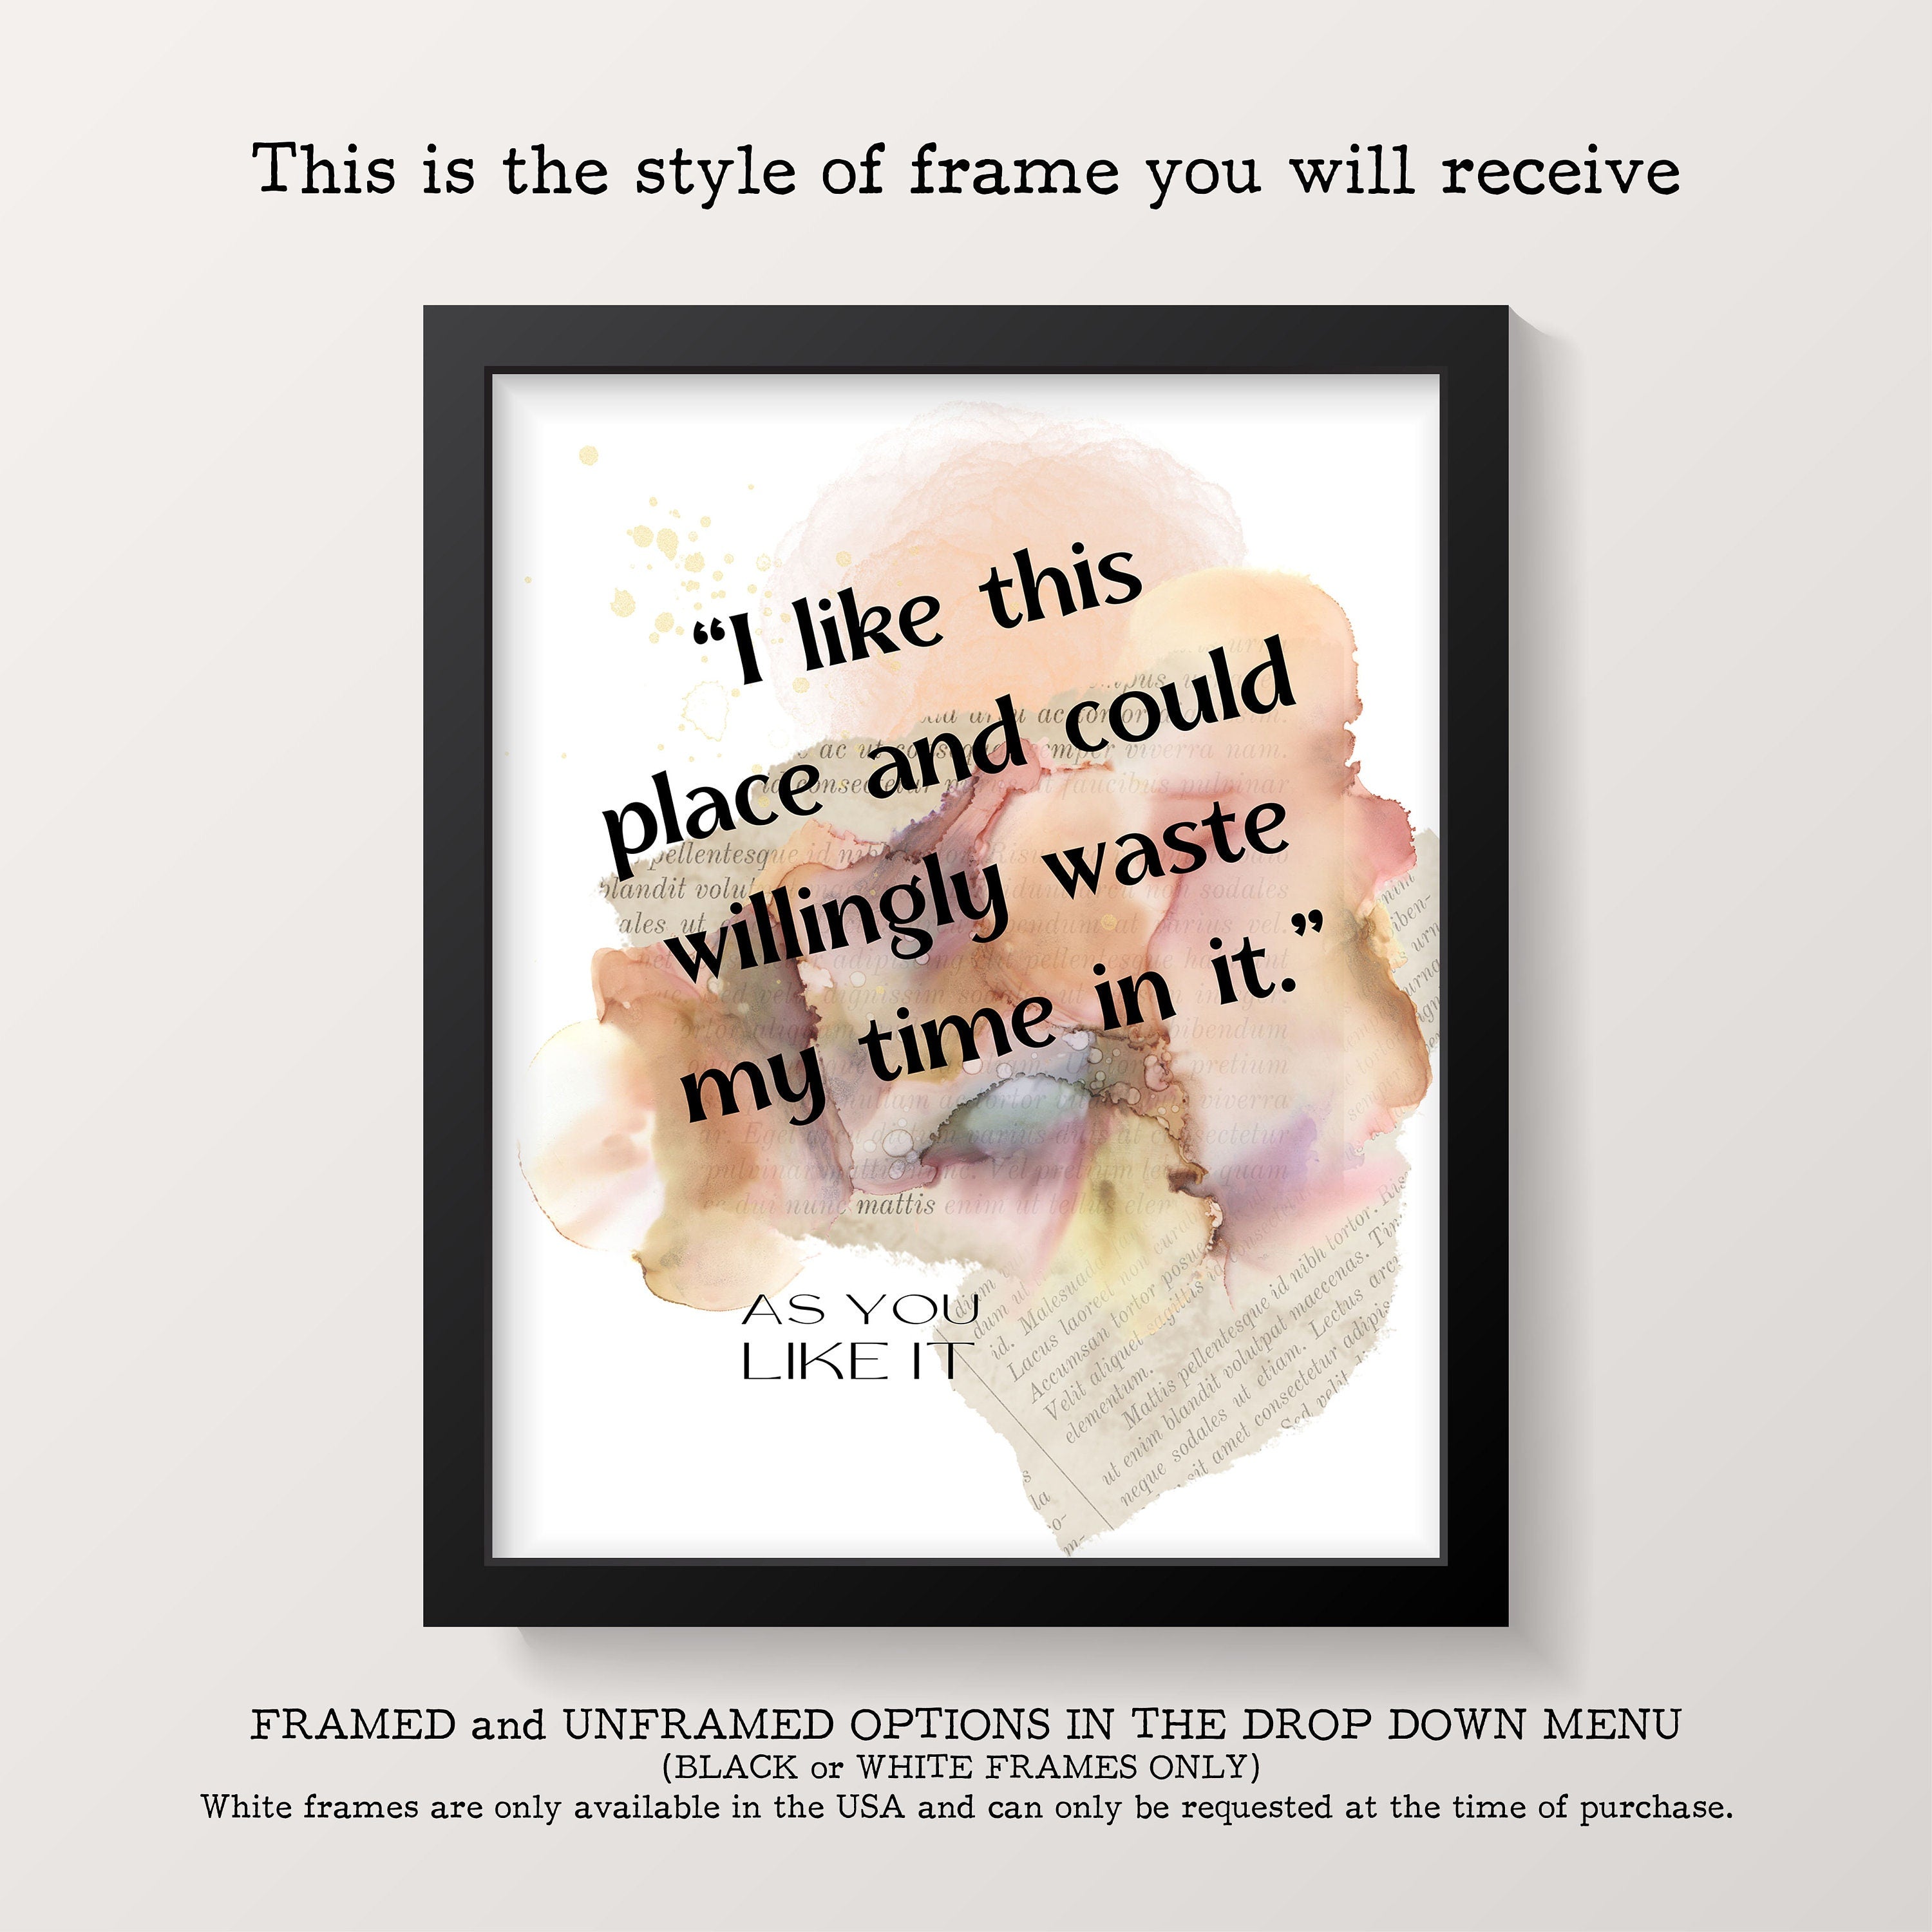 William Shakespeare Quote Print I Like This Place, As You Like It Inspirational Quote Wall Art Prints Framed or Unframed